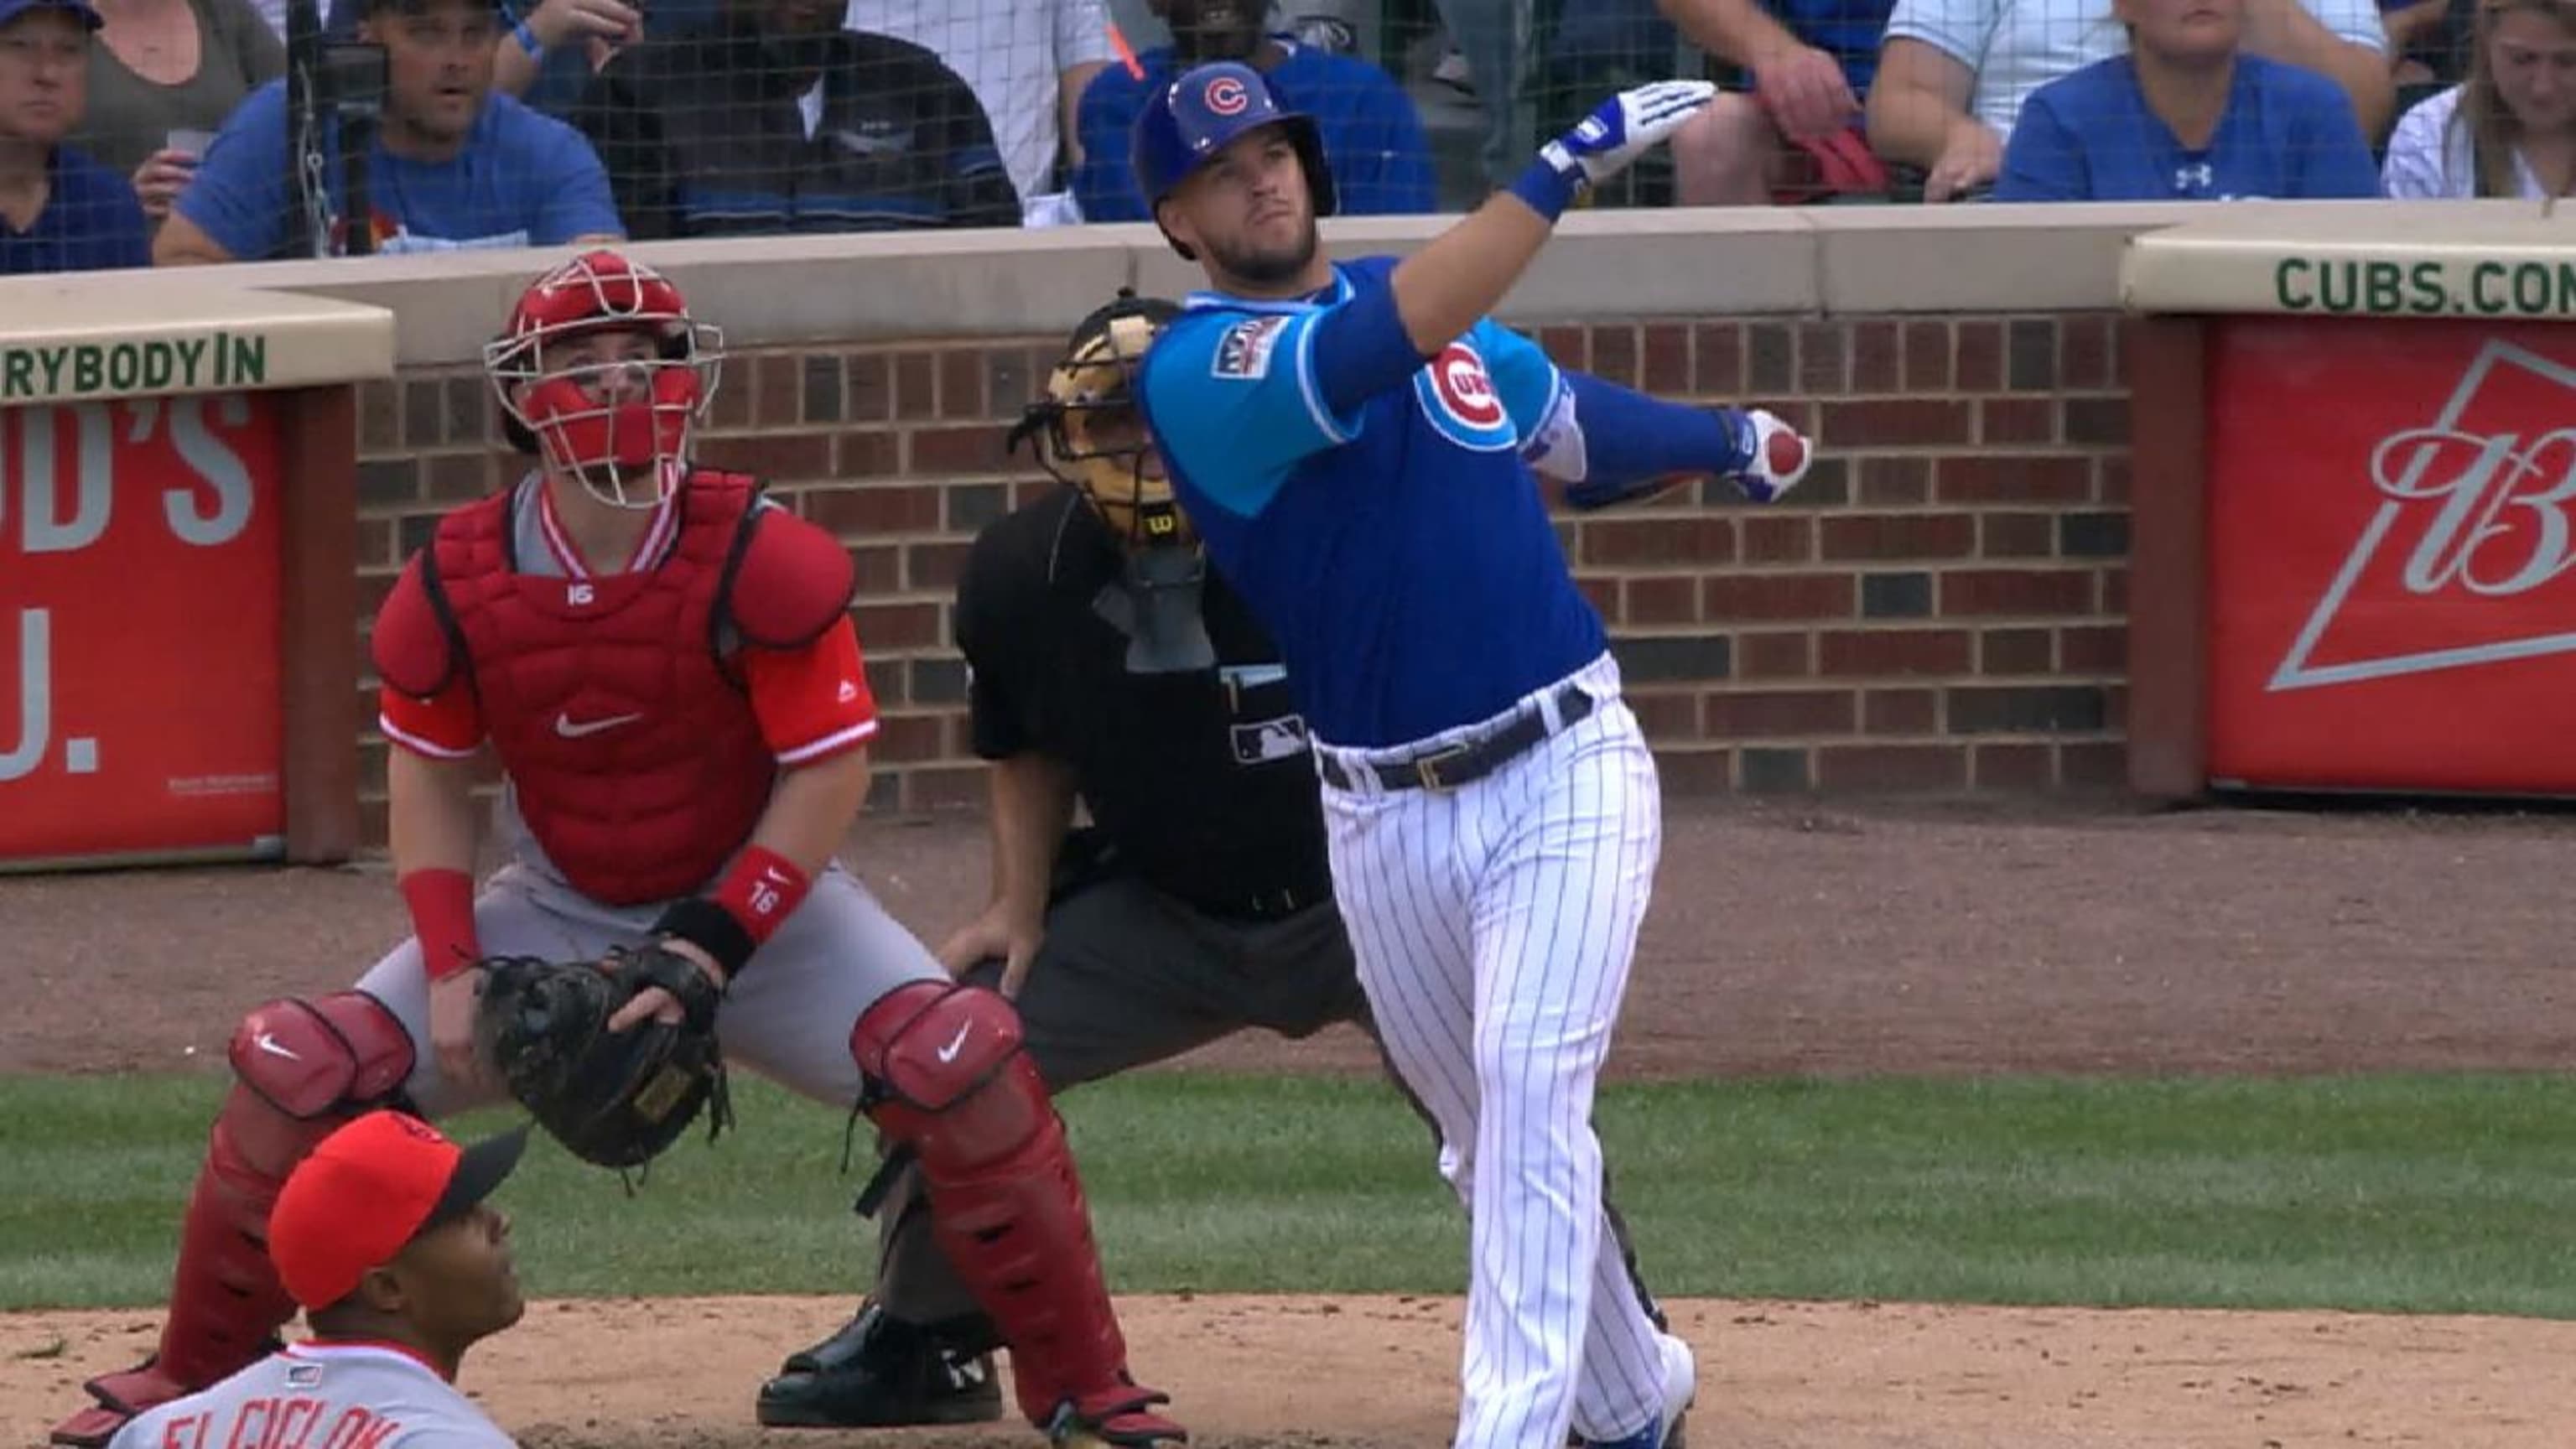 Big-hitting David Bote is proving he belongs with the Cubs - The